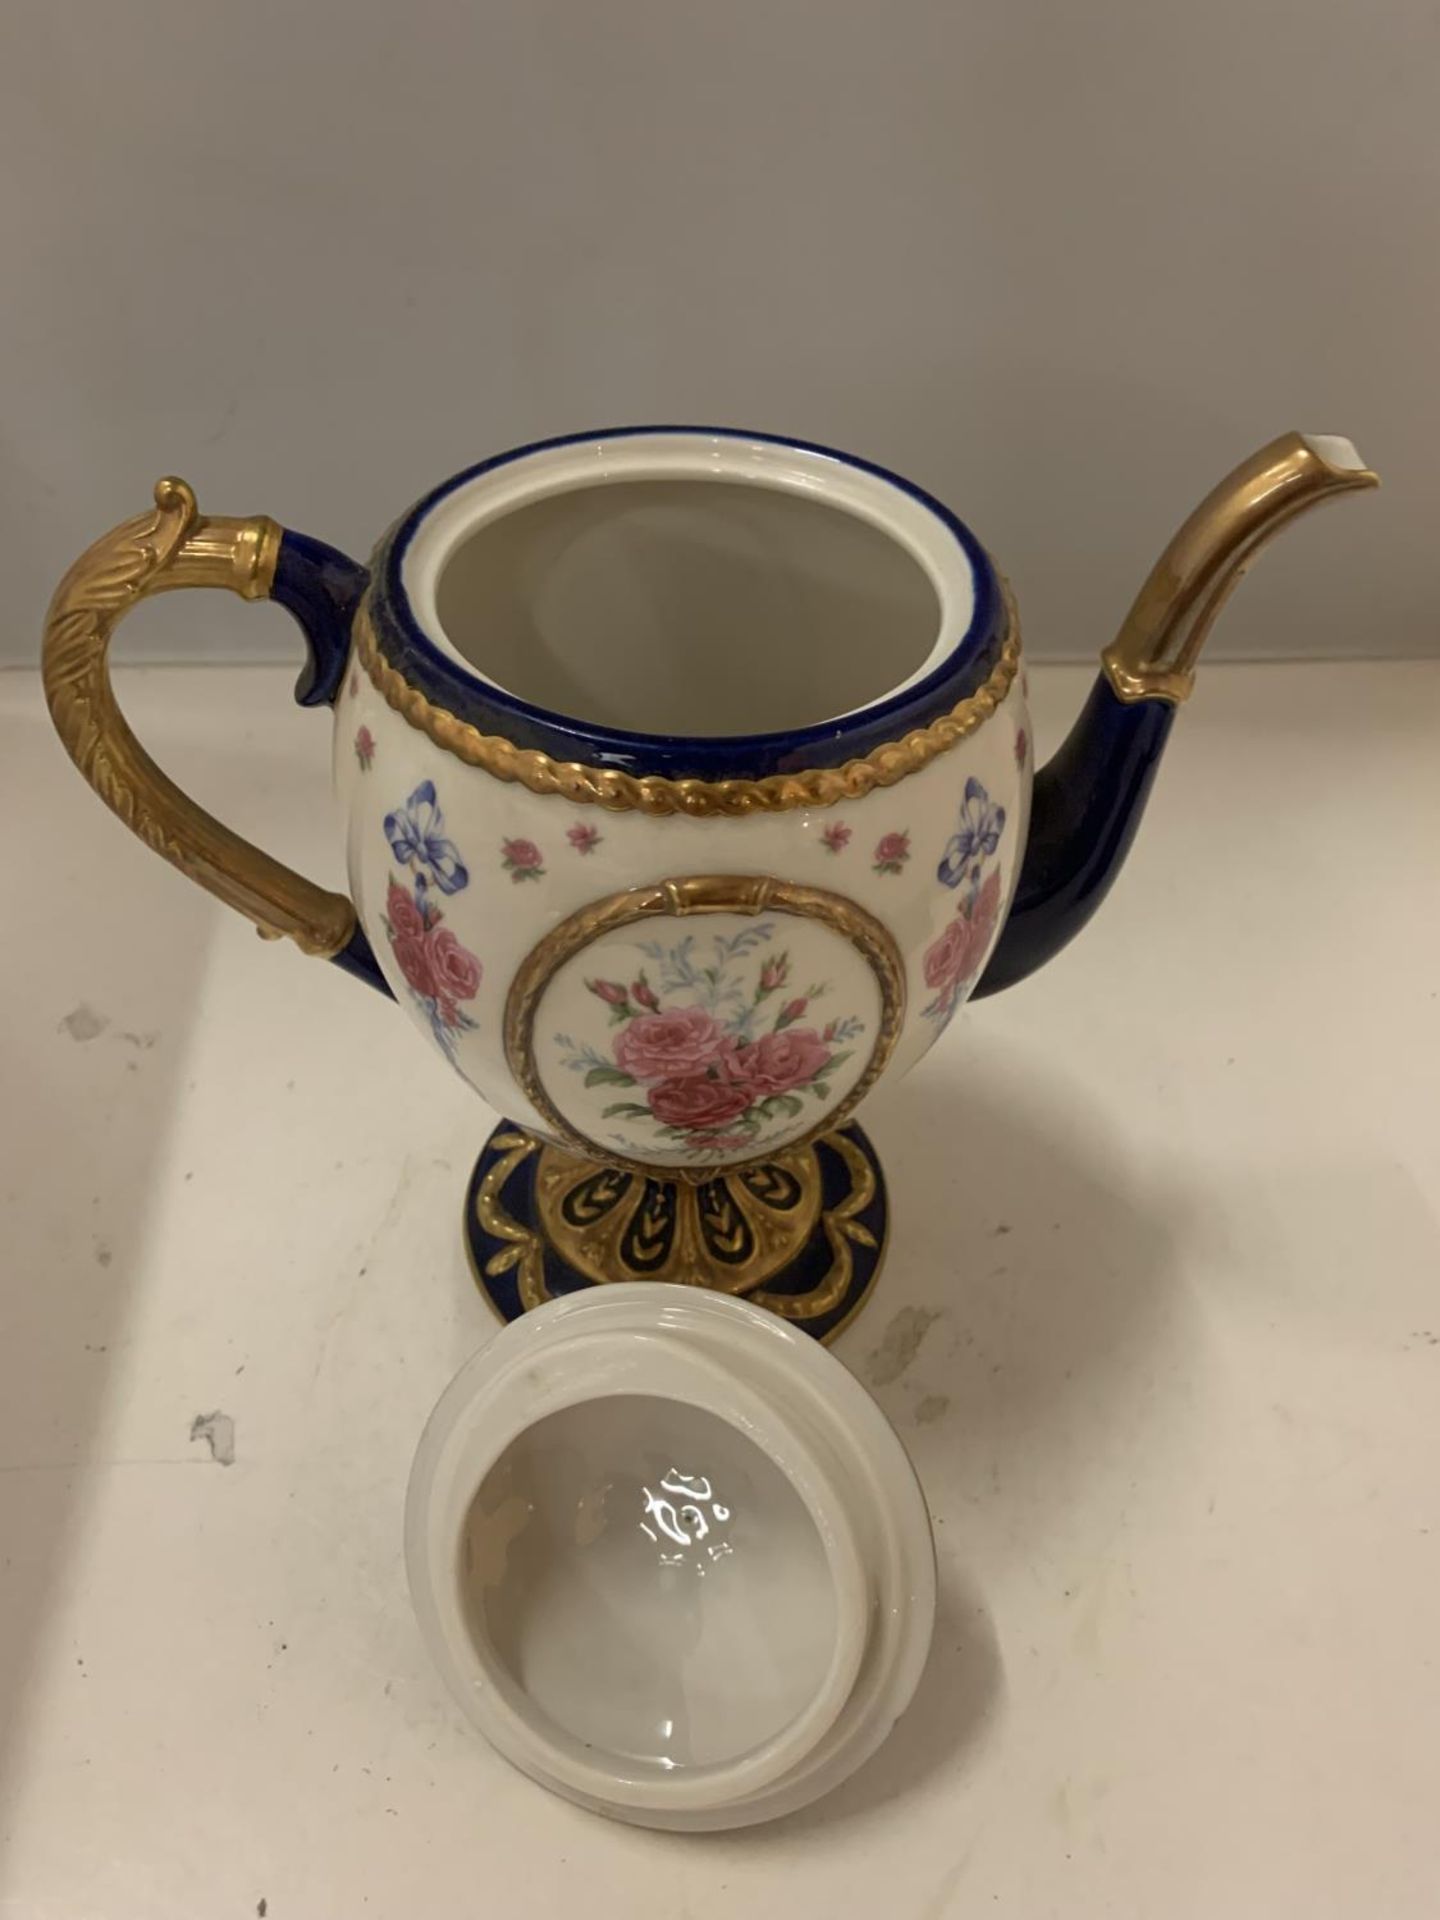 A FABERGE IMPERIAL TEAPOT WITH CERTIFICATE OF AUTHENTICITY - Image 5 of 7